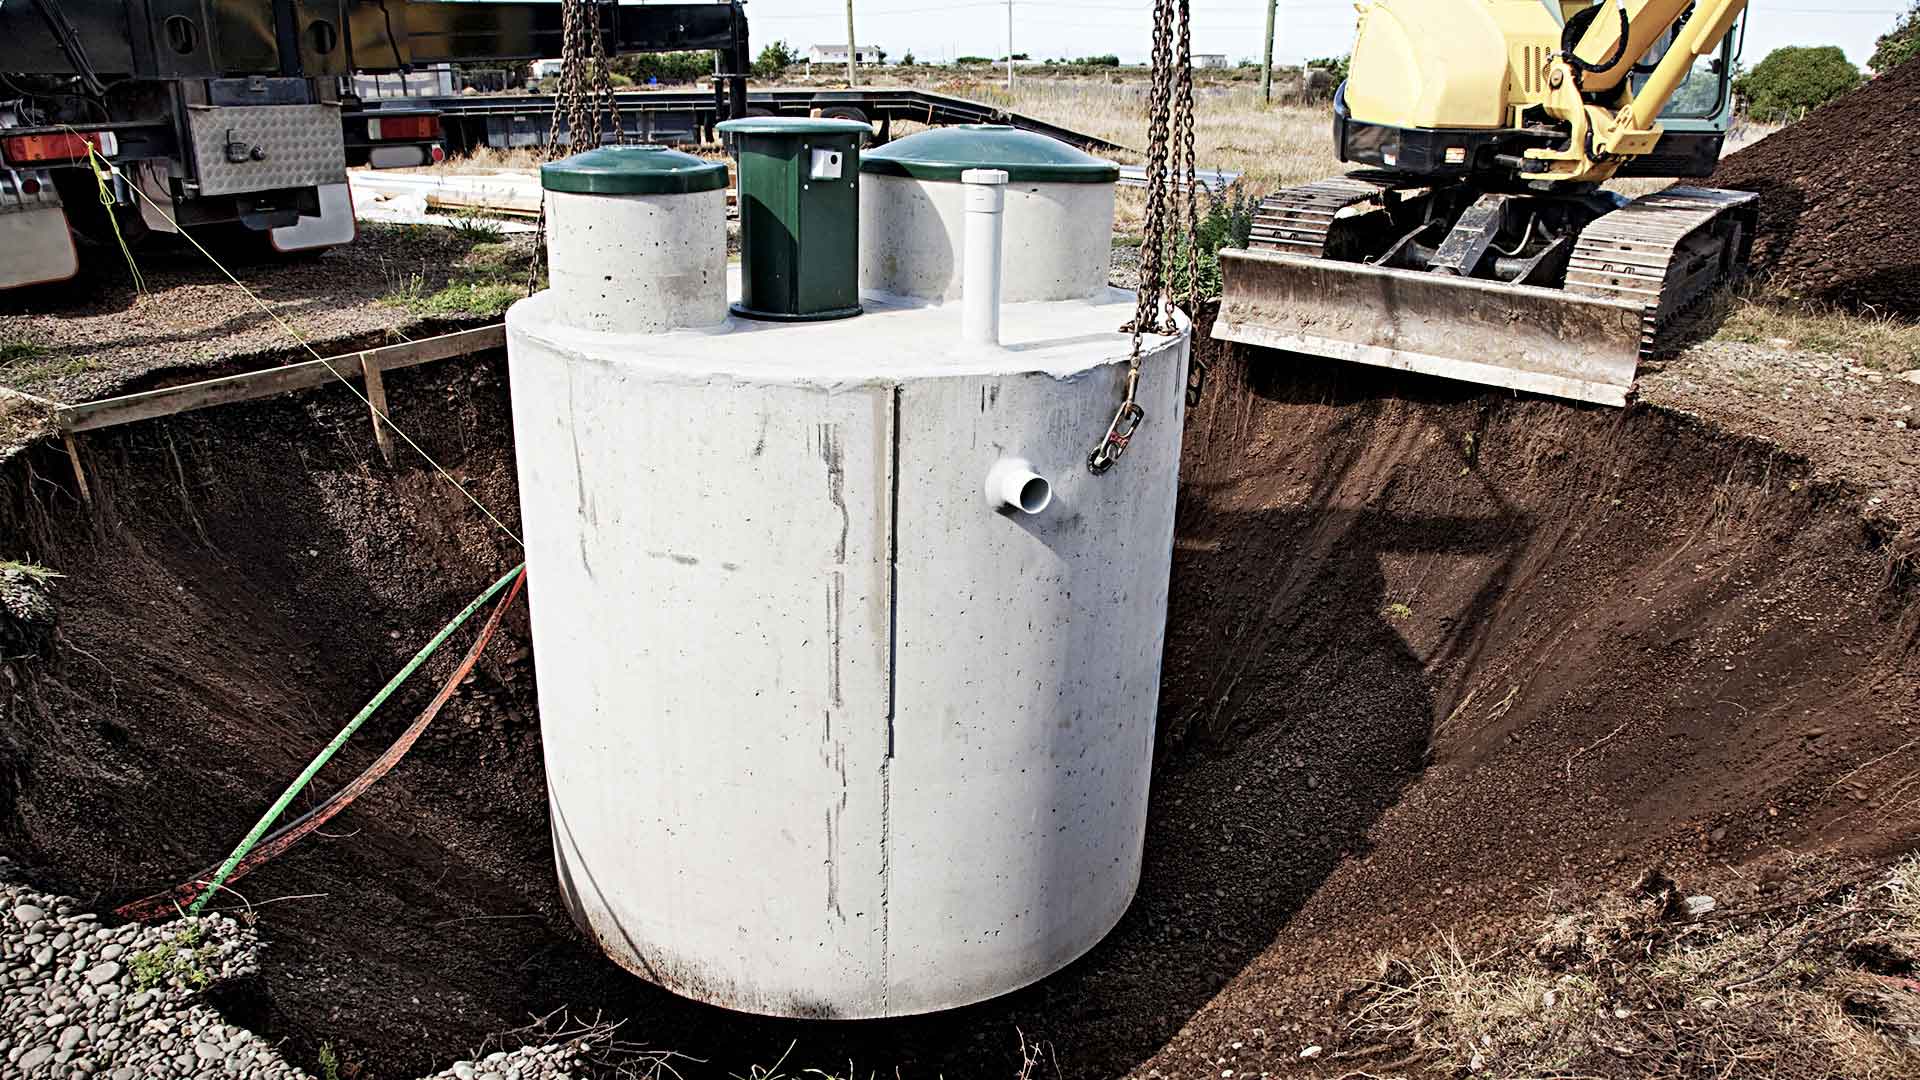 Kamloops Septic Tank Pumping, Potable Water Delivery and Portable Toilet Rentals